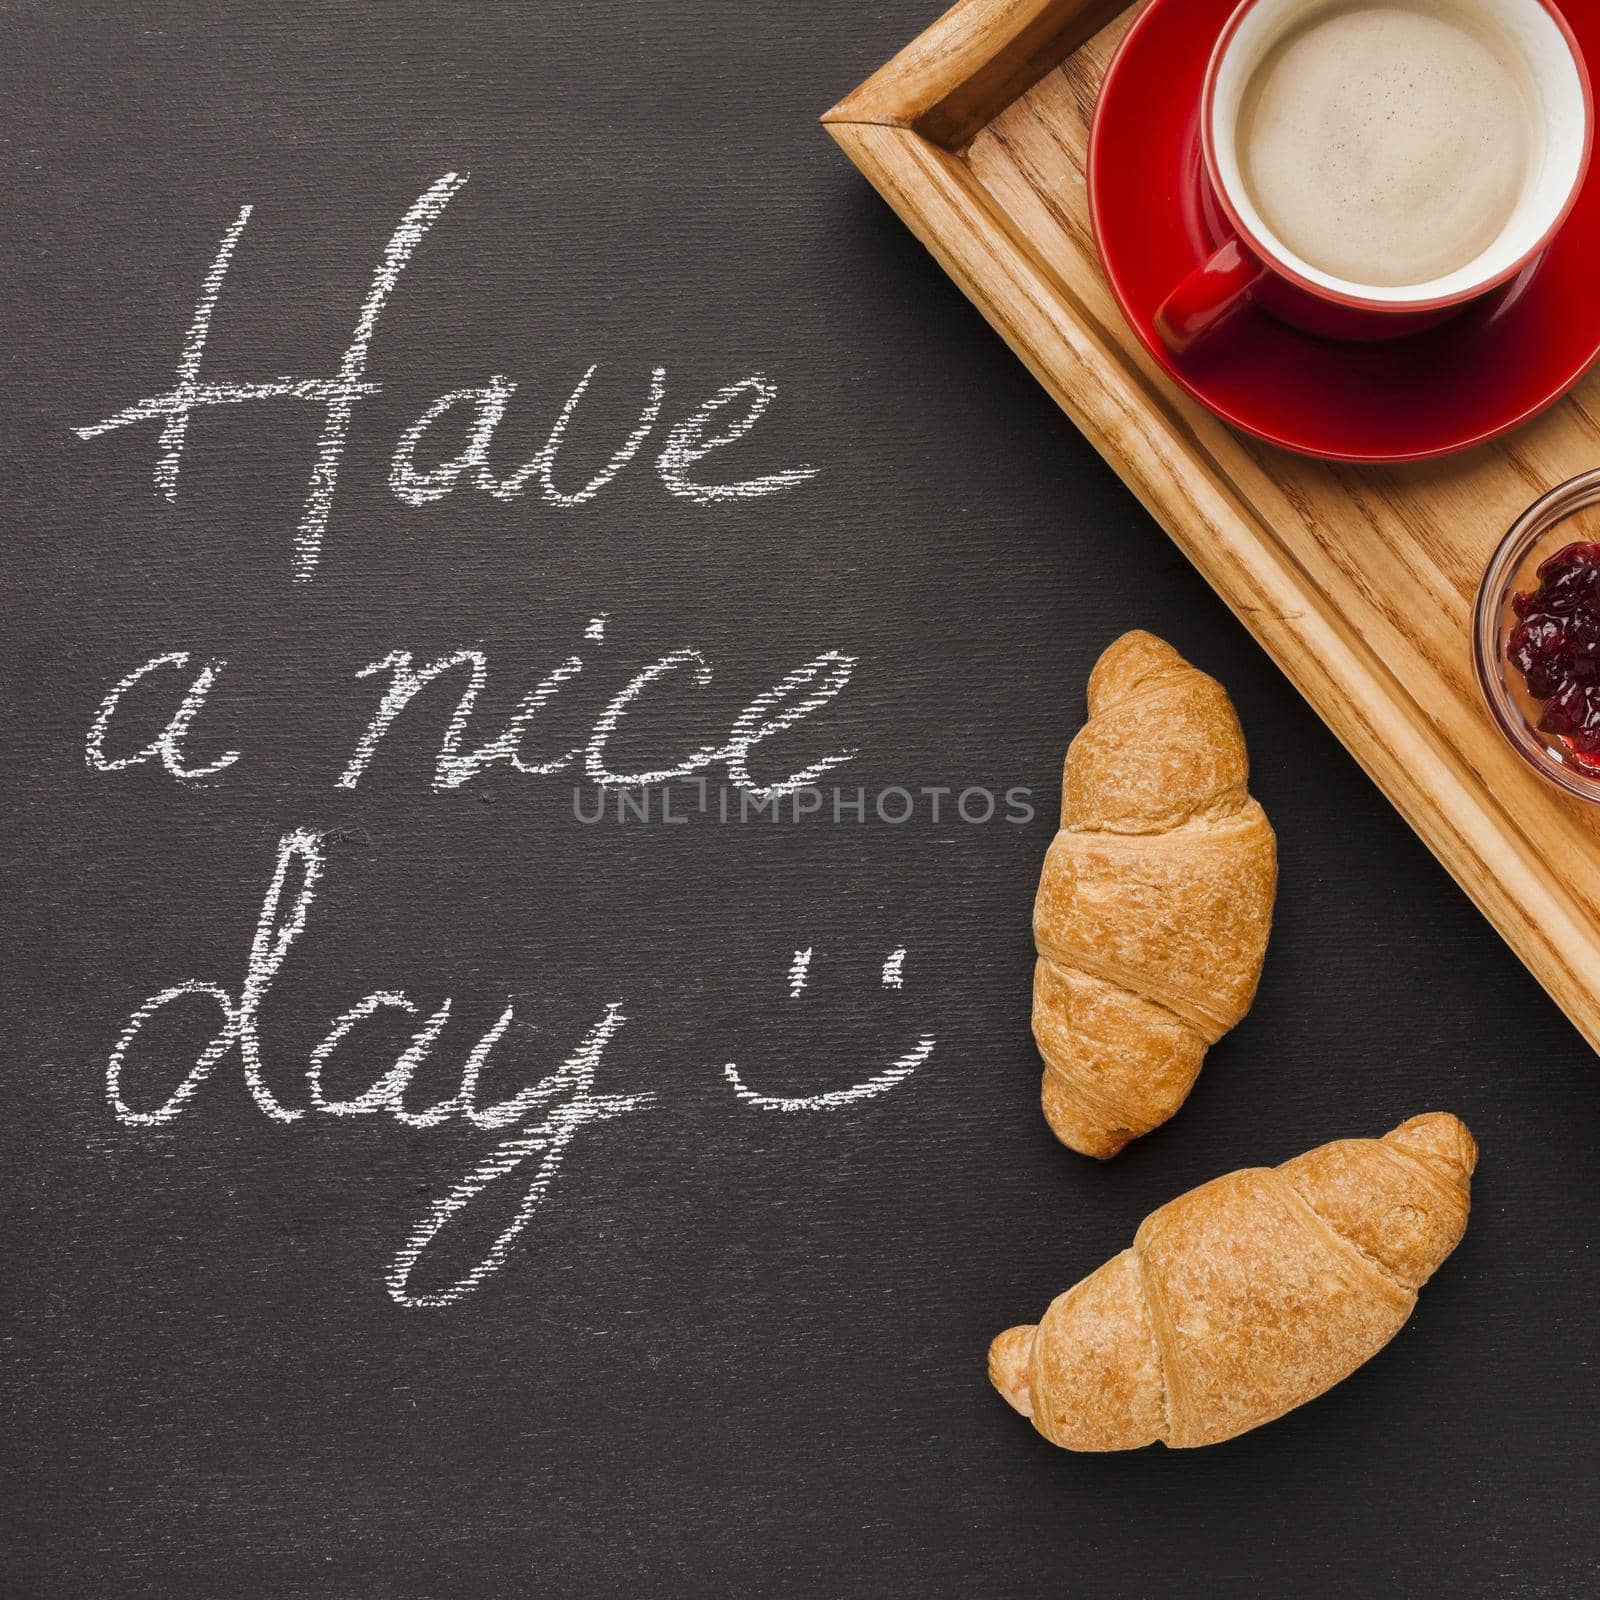 have nice day message with breakfast by Zahard